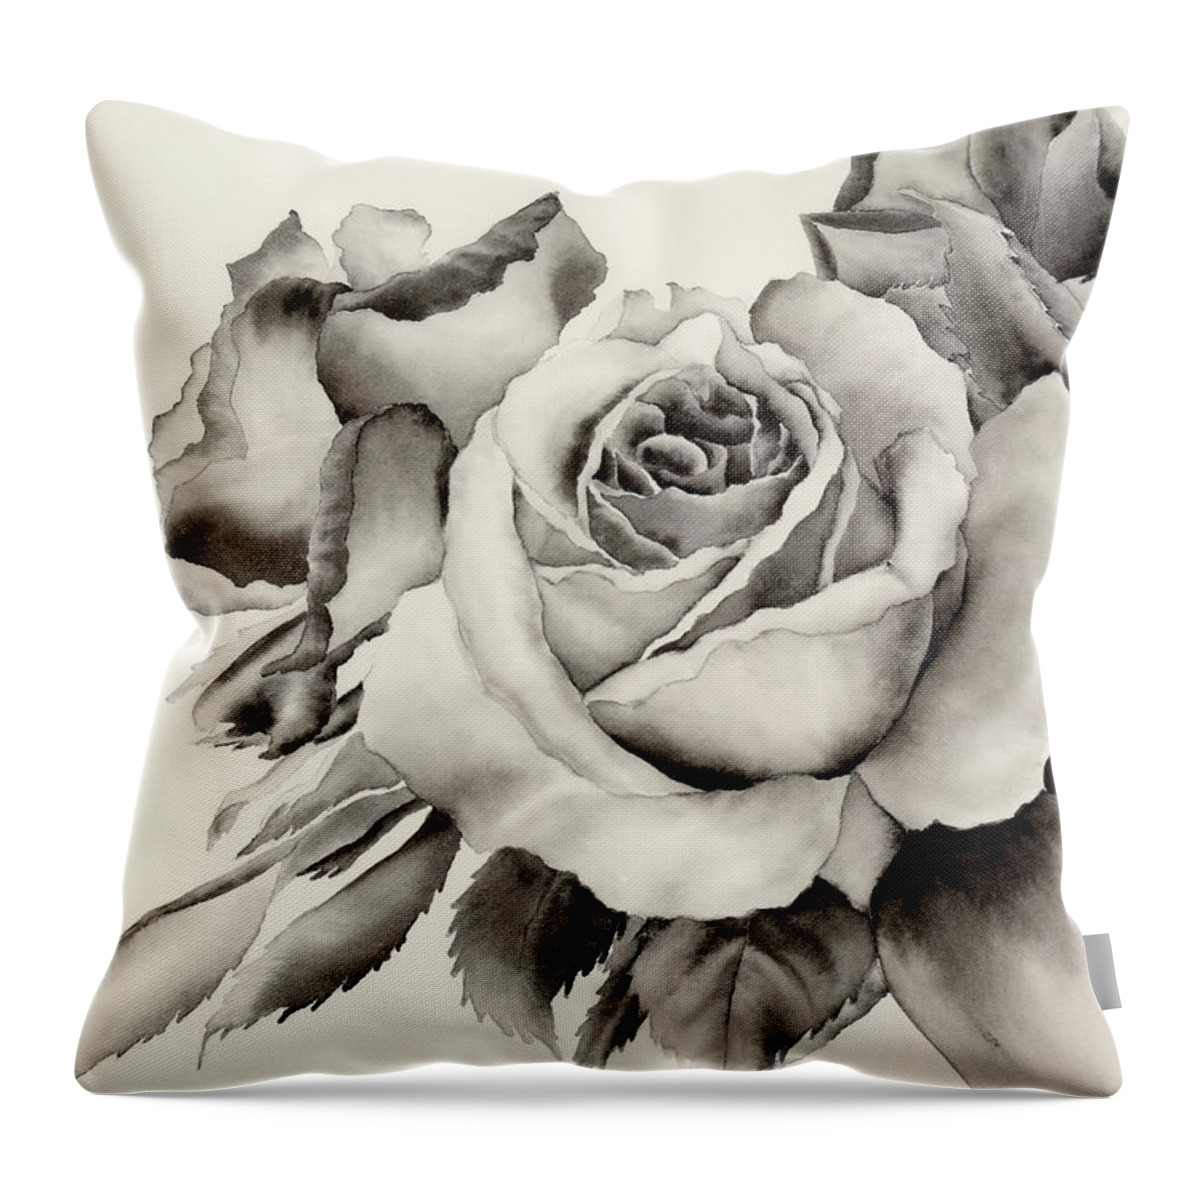 Watercolor Throw Pillow featuring the painting Rose Bouquet by Hailey E Herrera